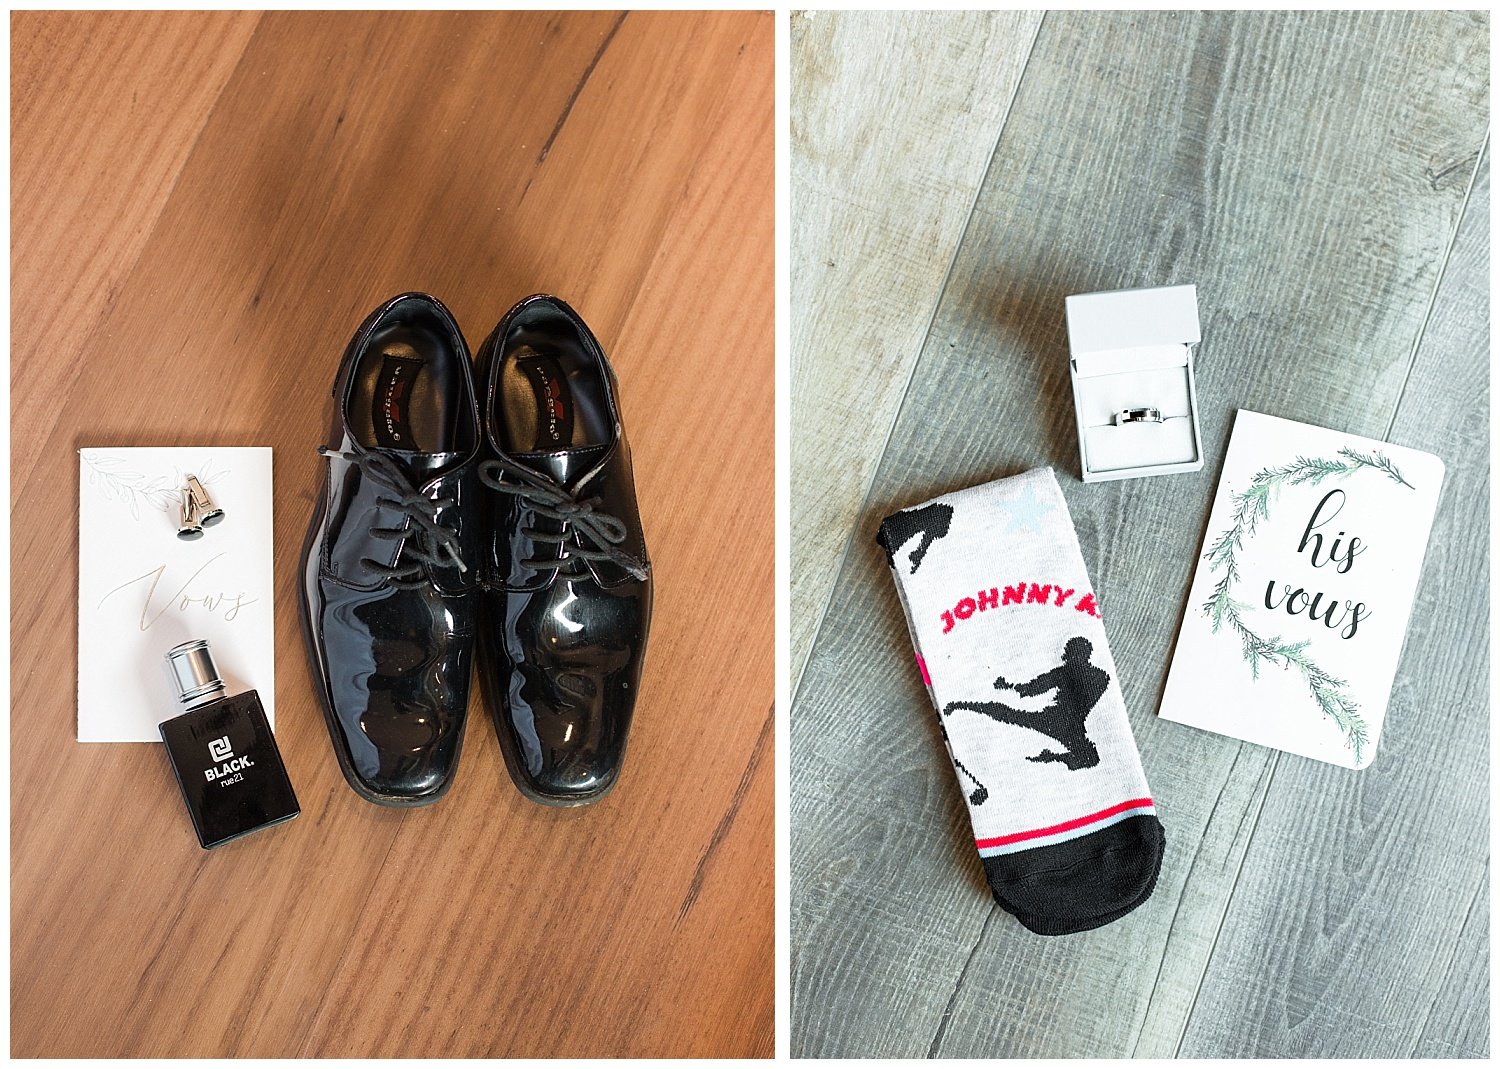 details of groom shoes and cologne at wedding